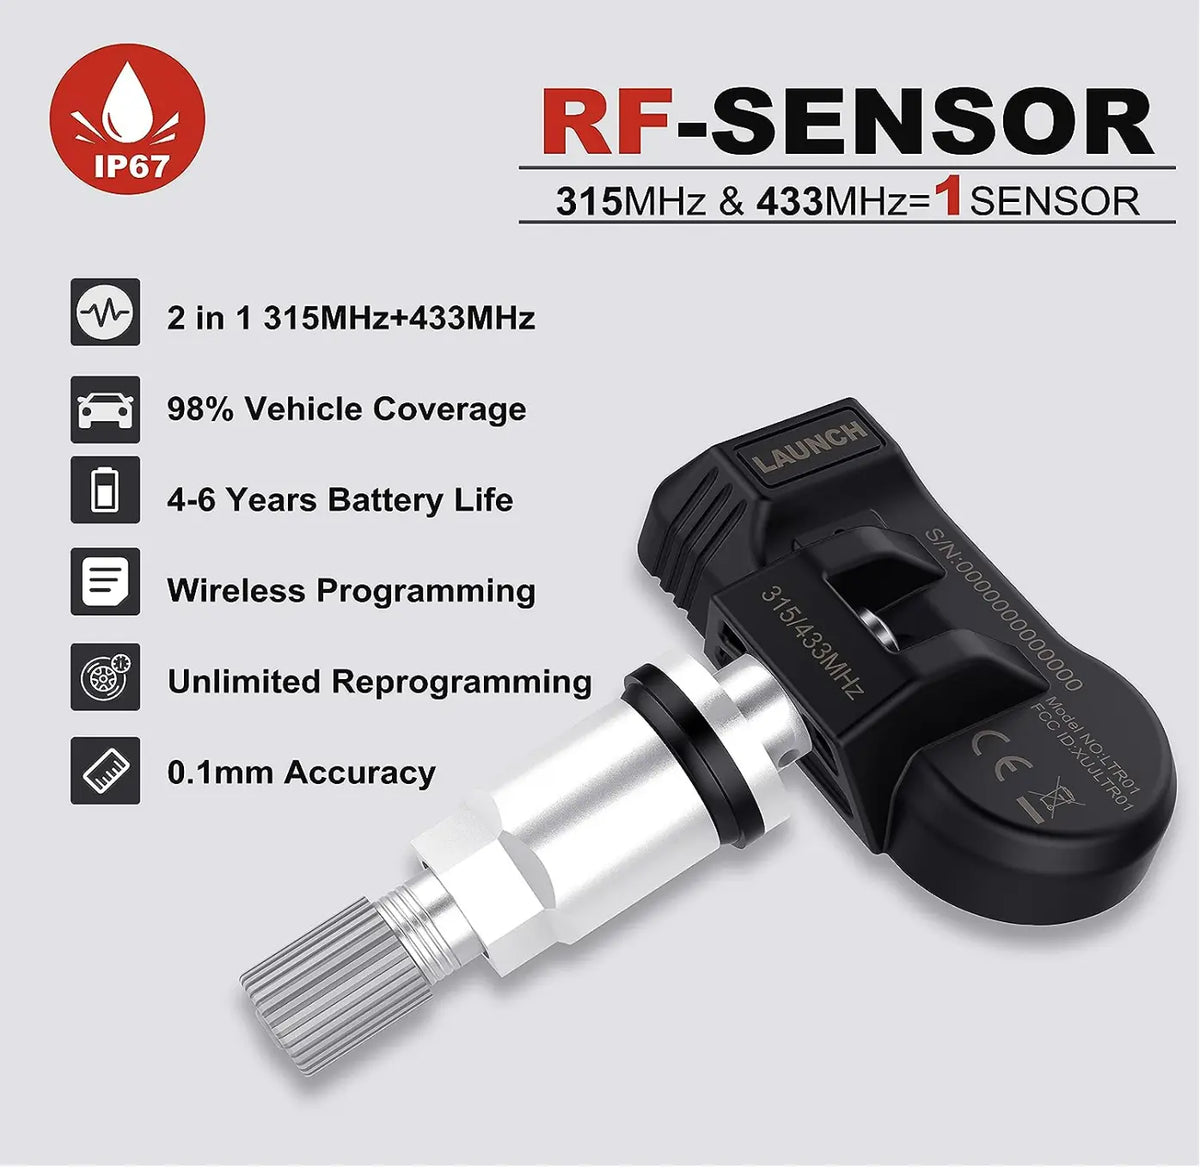 LAUNCH 2 IN 1 UNIVERSAL TPMS REPLACEMENT SENSOR 315MHZ & 433MHZ - FairTools